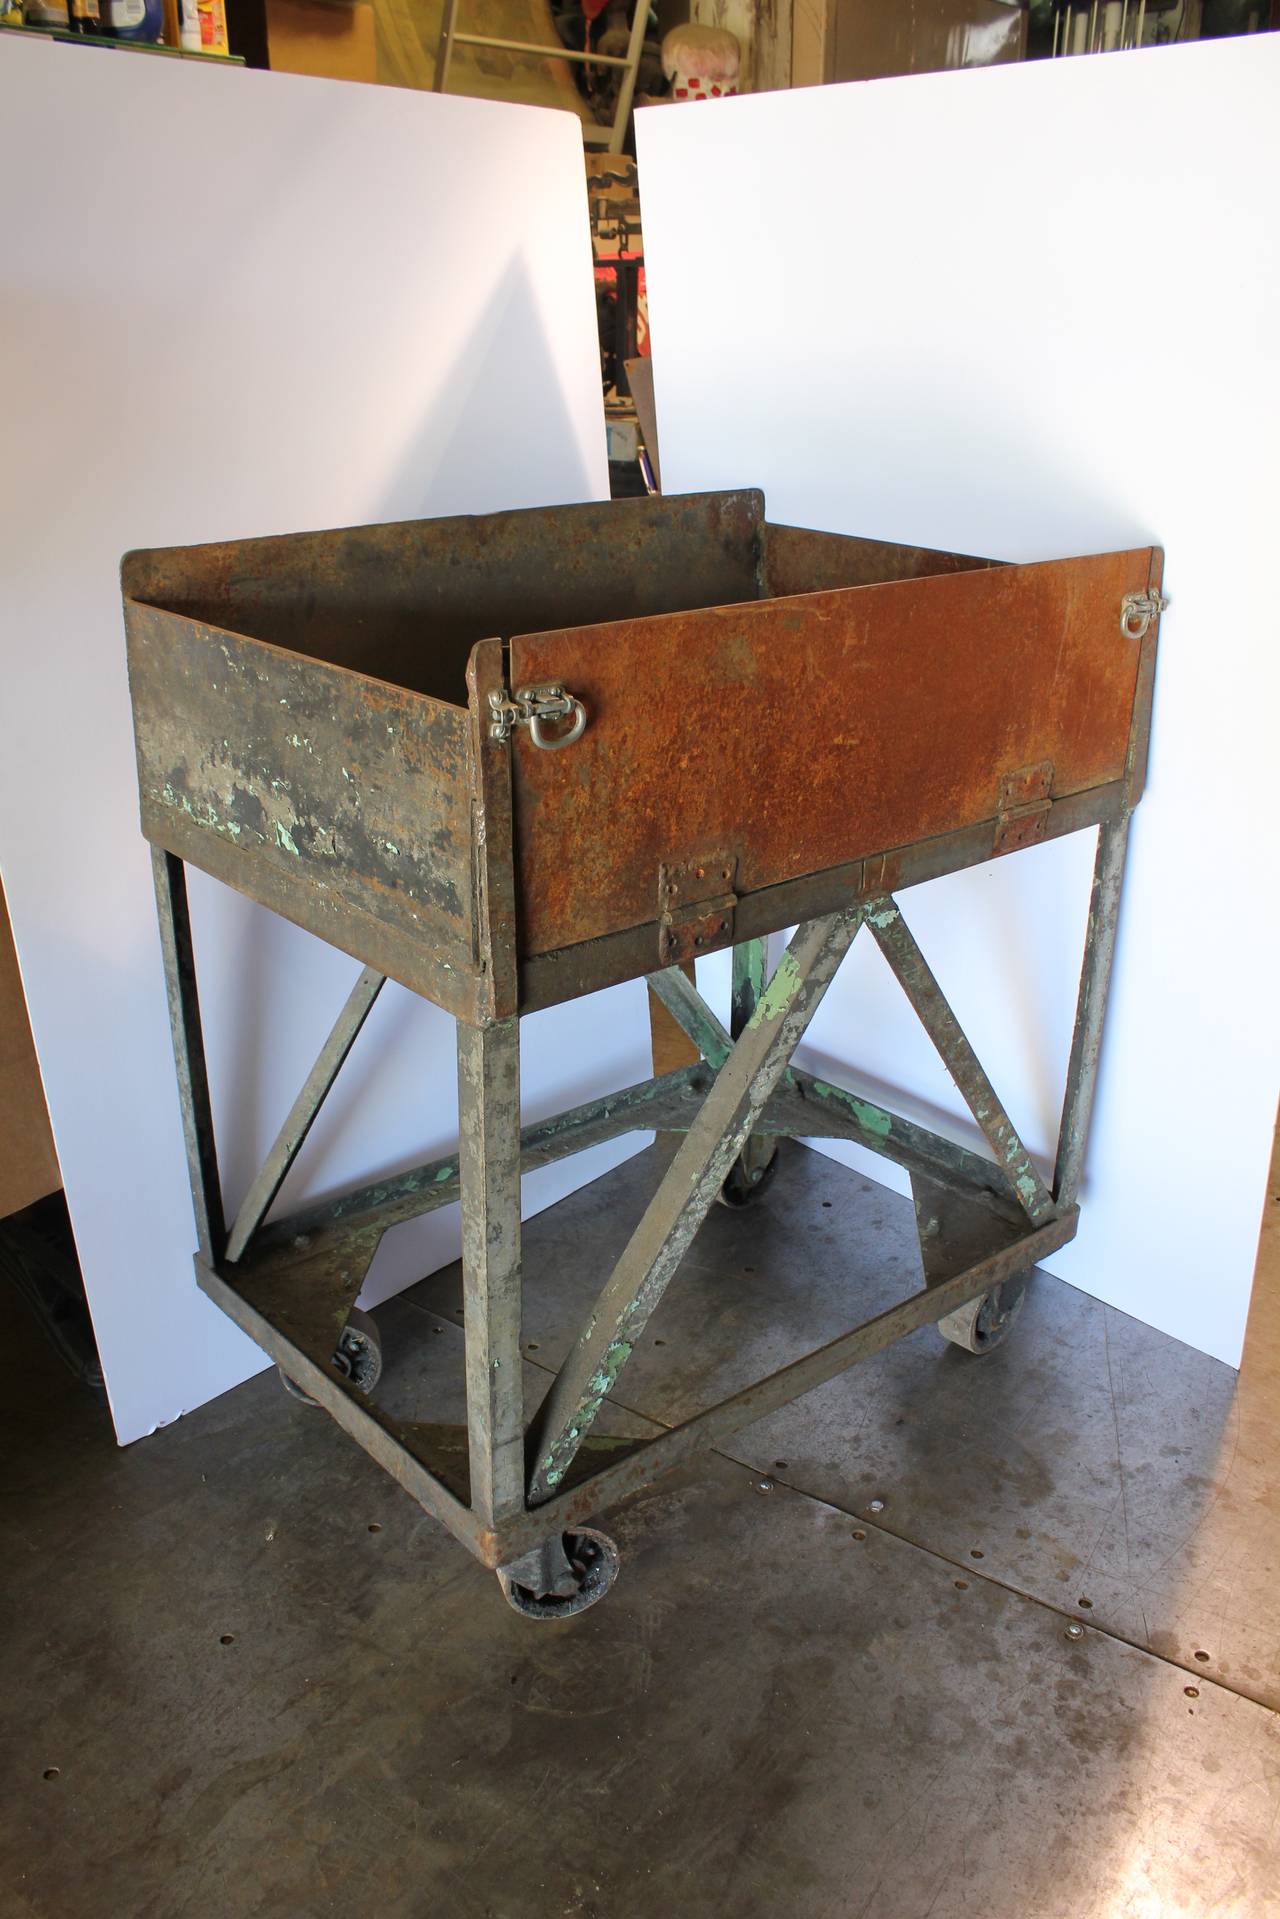 Vintage American Metal Bar Cart. We have more carts available.